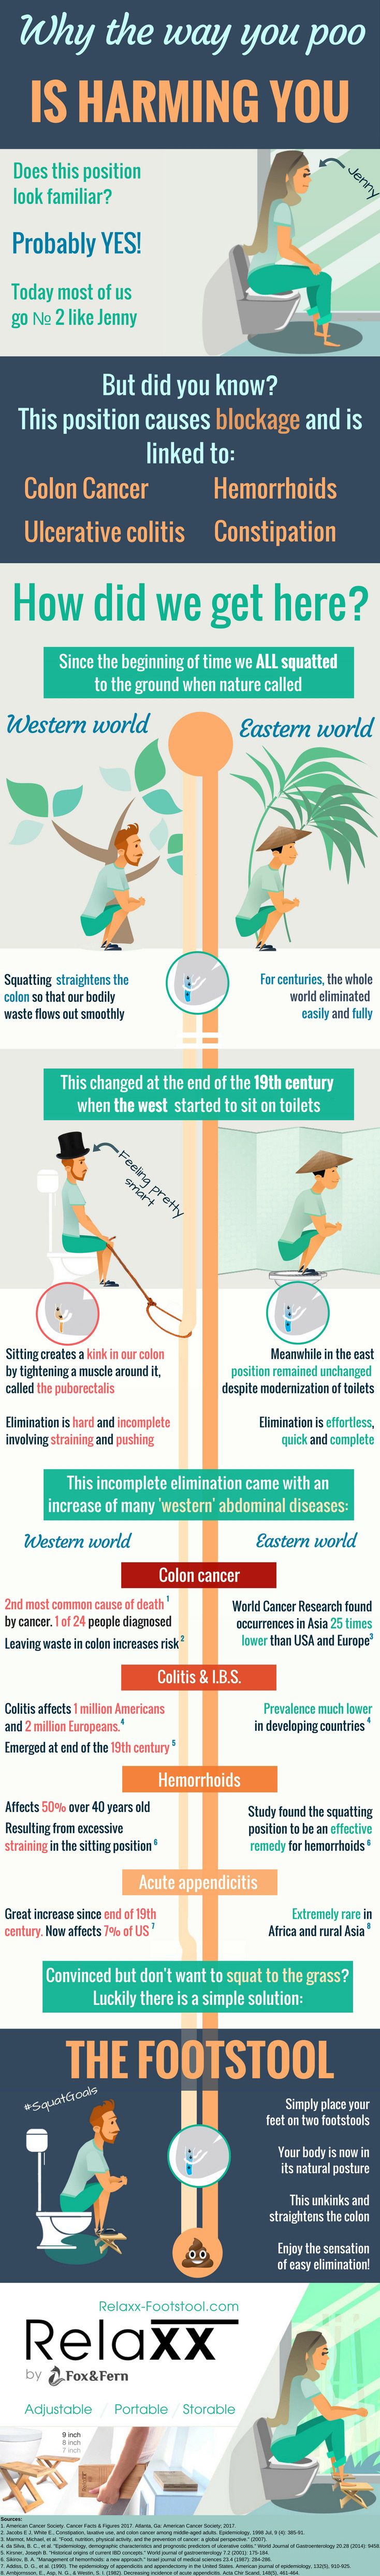 How Your Poo-Pose (Sit or Squat) Impacts Your Health - Infographic